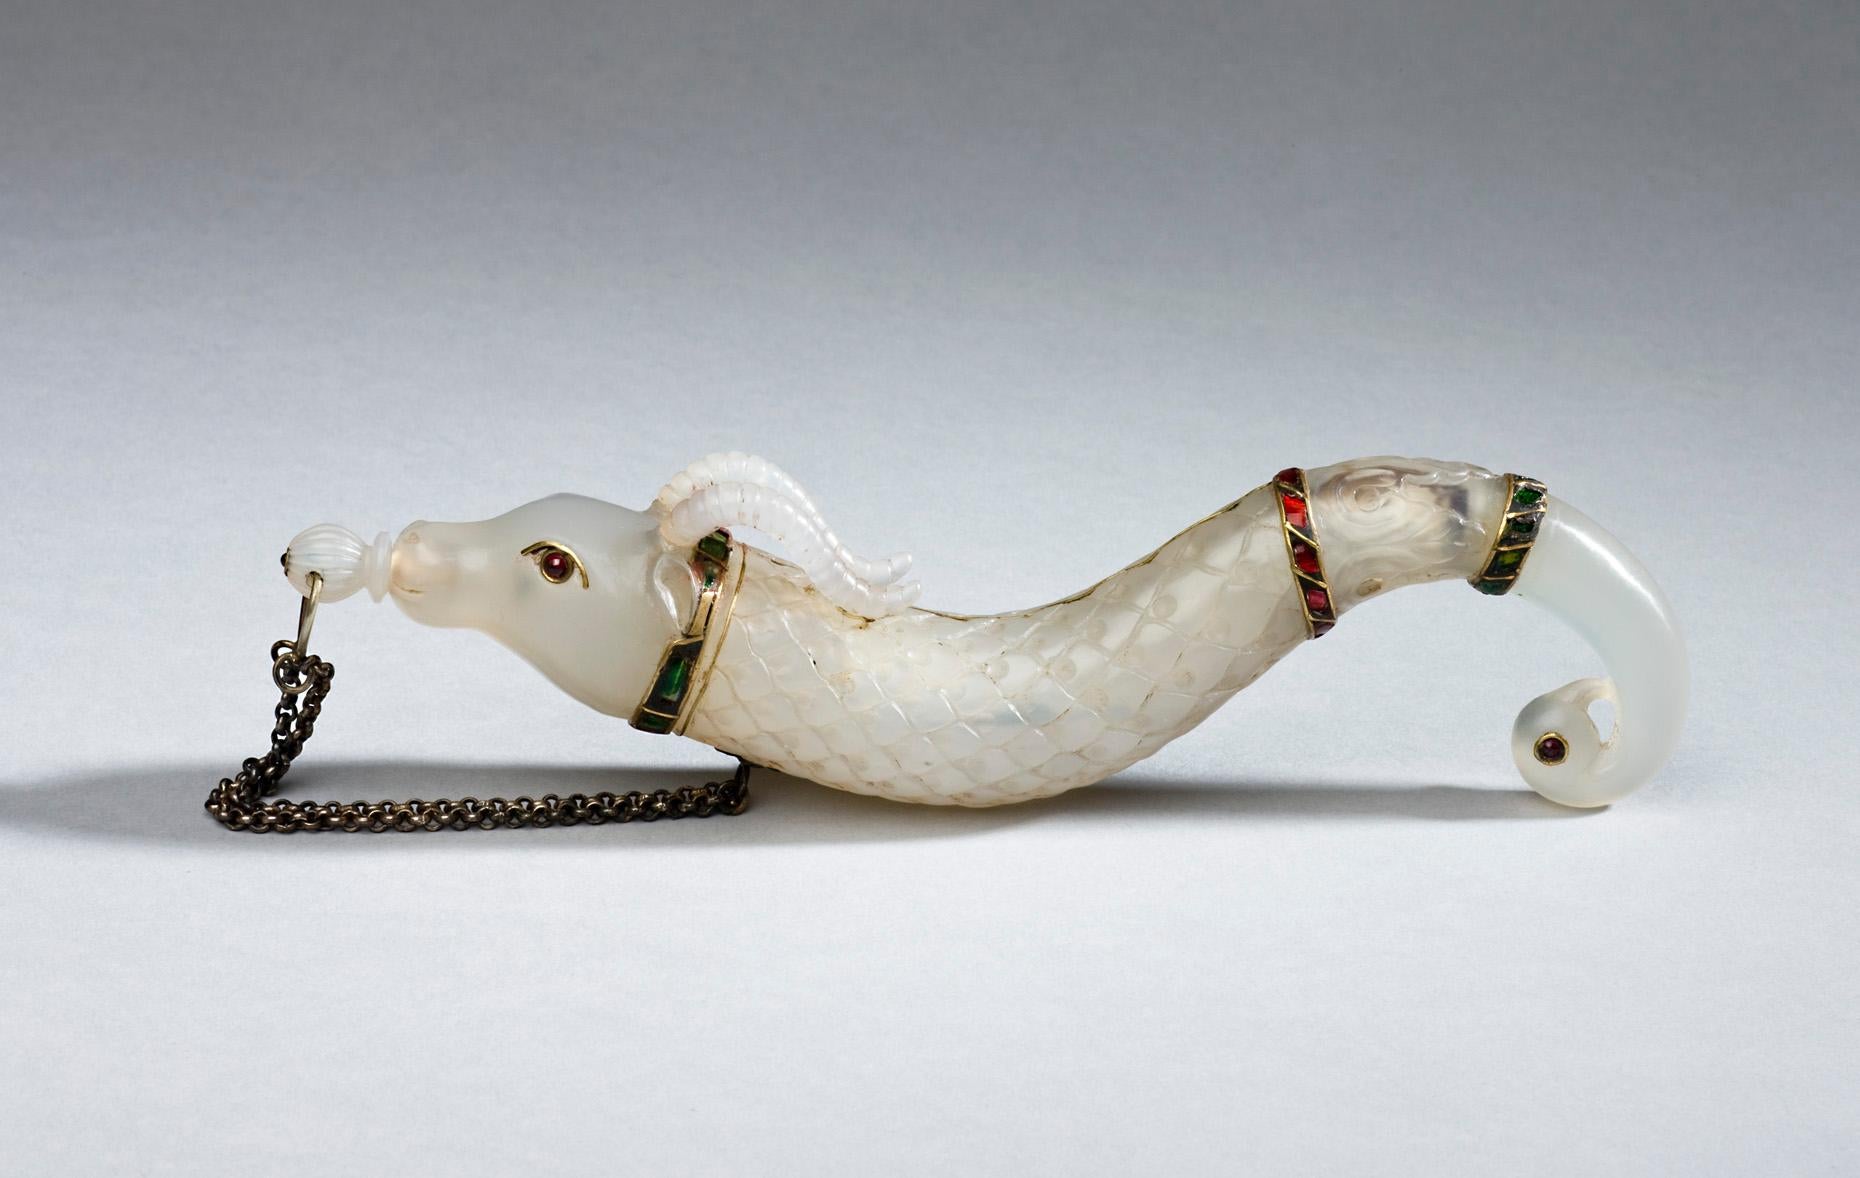 Exquisite carved white jade powder flask as a caribou-like form with red rubies eyes, body carved in shell design and decorated with red rubies and green emeralds bands, ends in the form of a parrot with red rubies eyes.